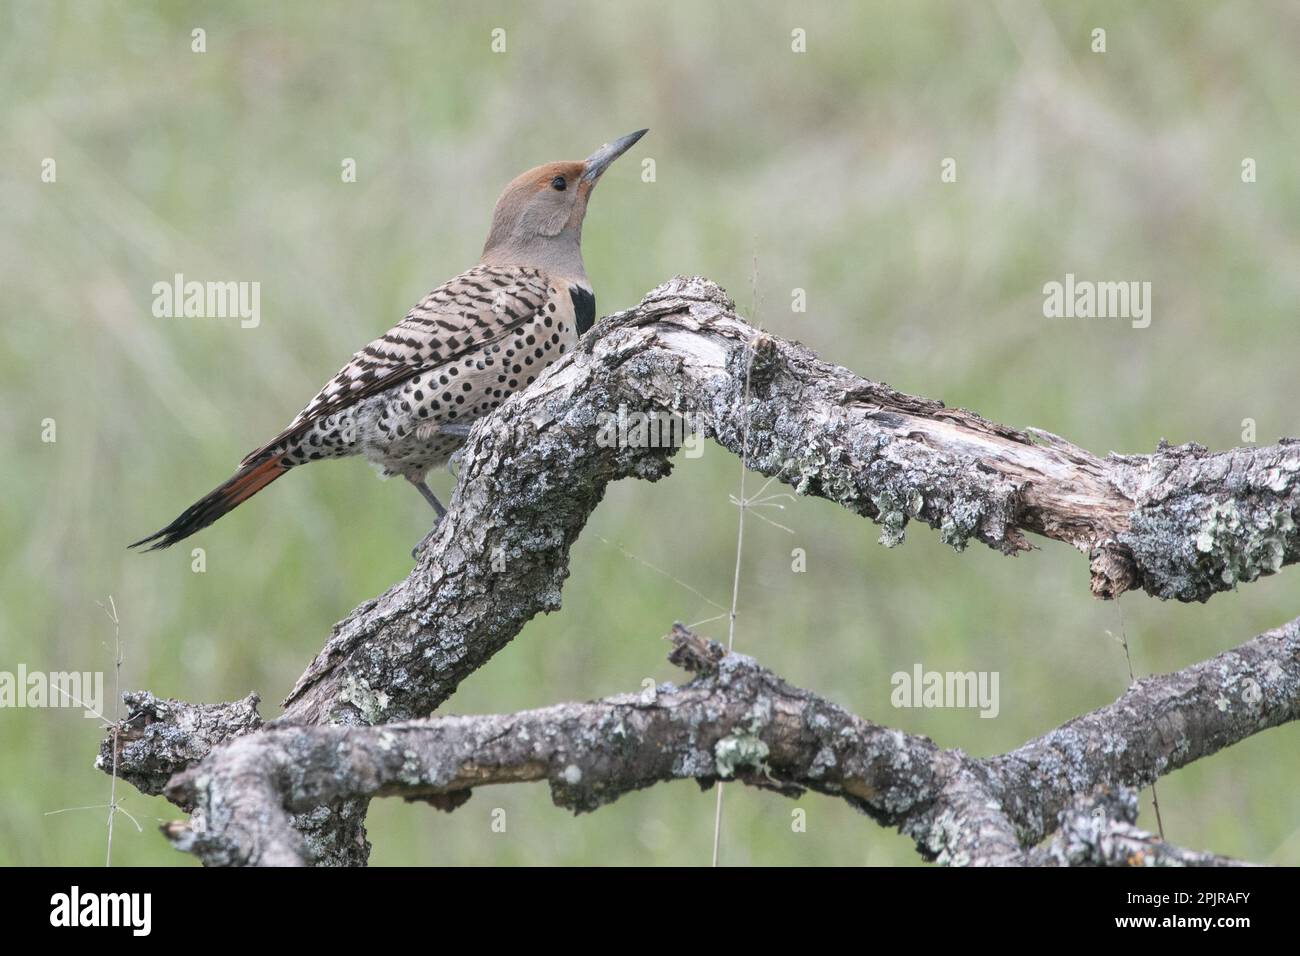 A northern flicker or common flicker (Colaptes auratus) from Blue oak ranch reserve in Santa Clara County, California. Stock Photo